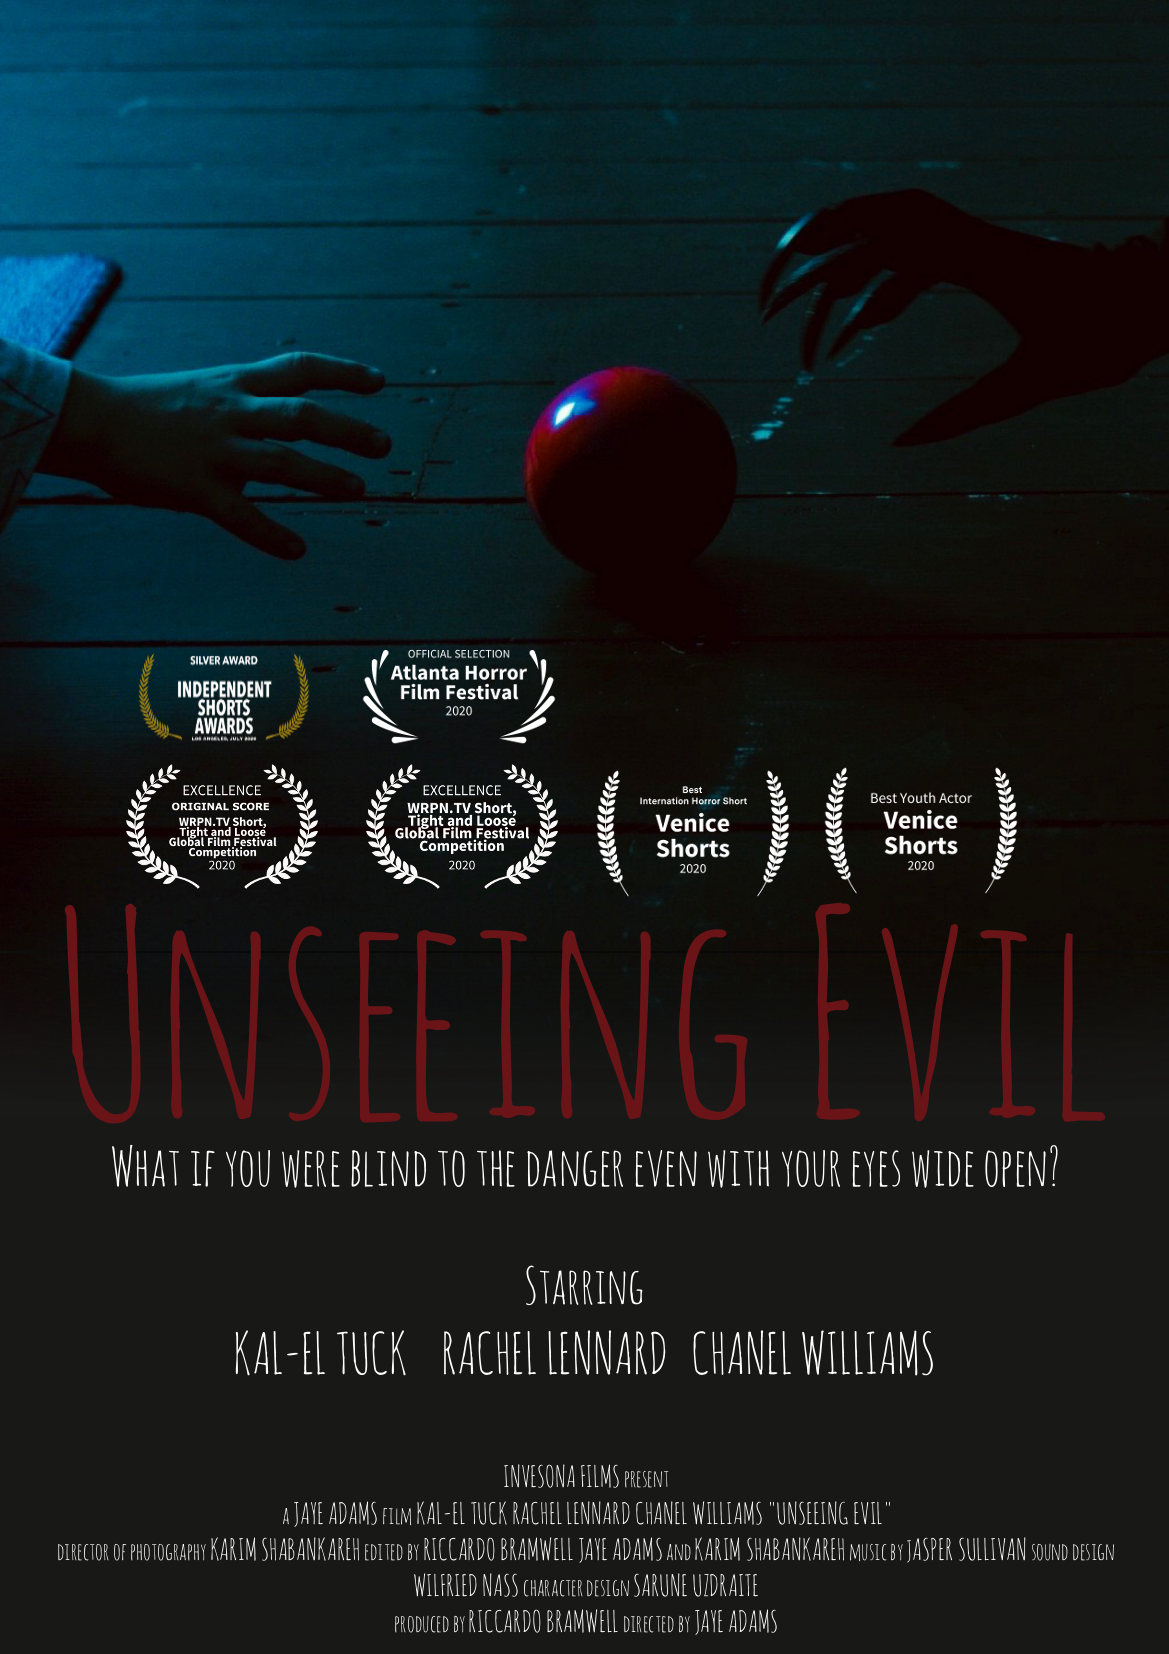 UNSEEING EVIL